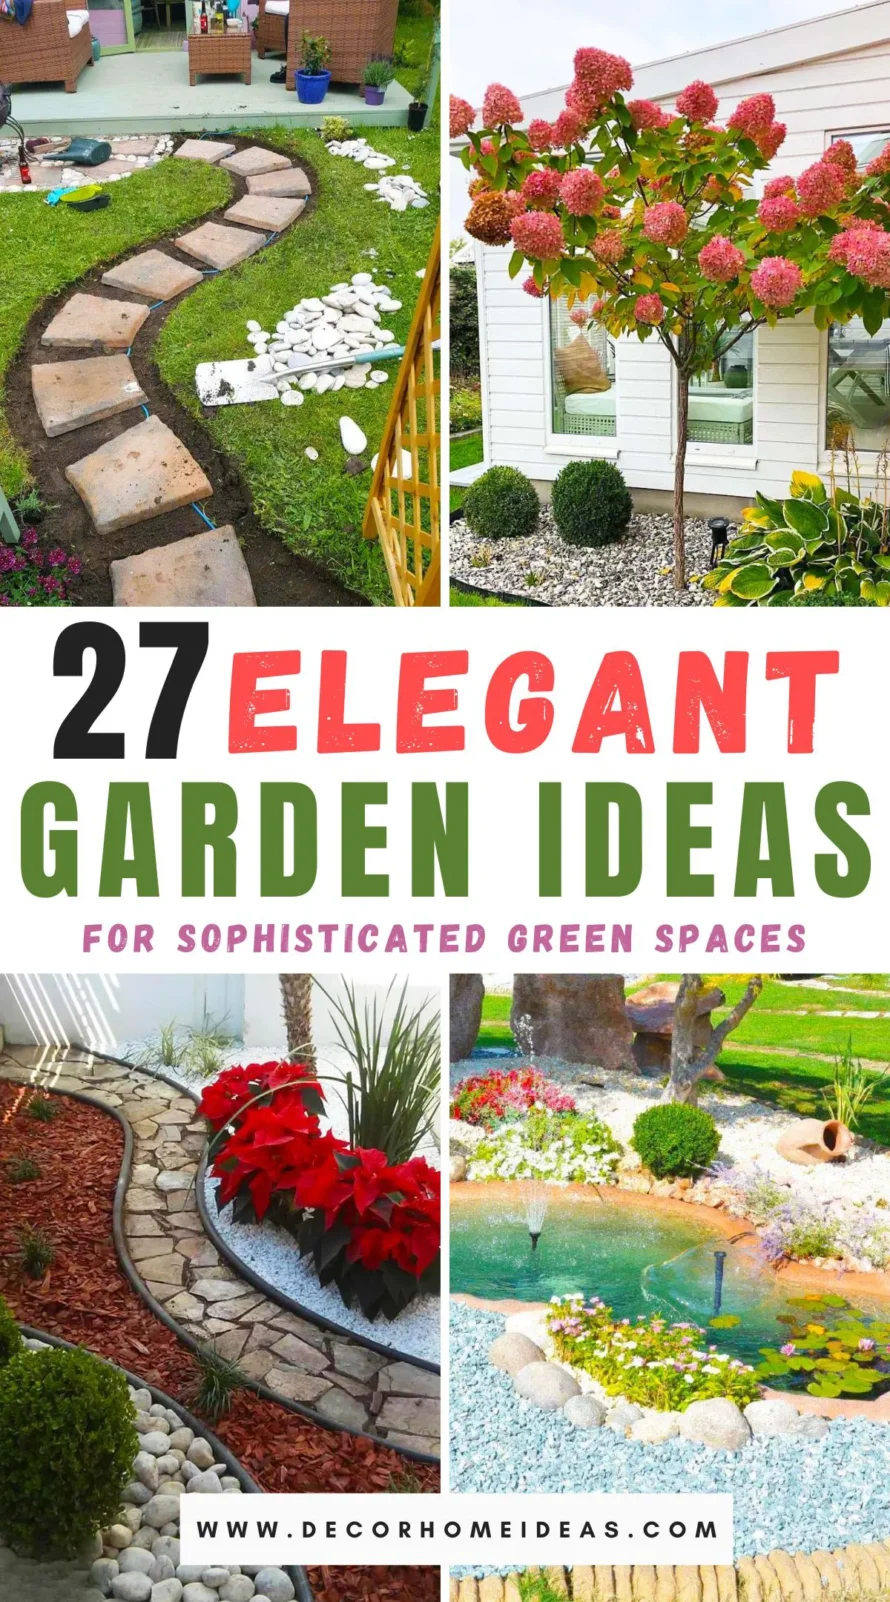 Discover 27 sophisticated garden designs that transform any outdoor space into an elegant oasis. From minimalist layouts to lush greenery, find inspiration to elevate your garden's charm and tranquility.